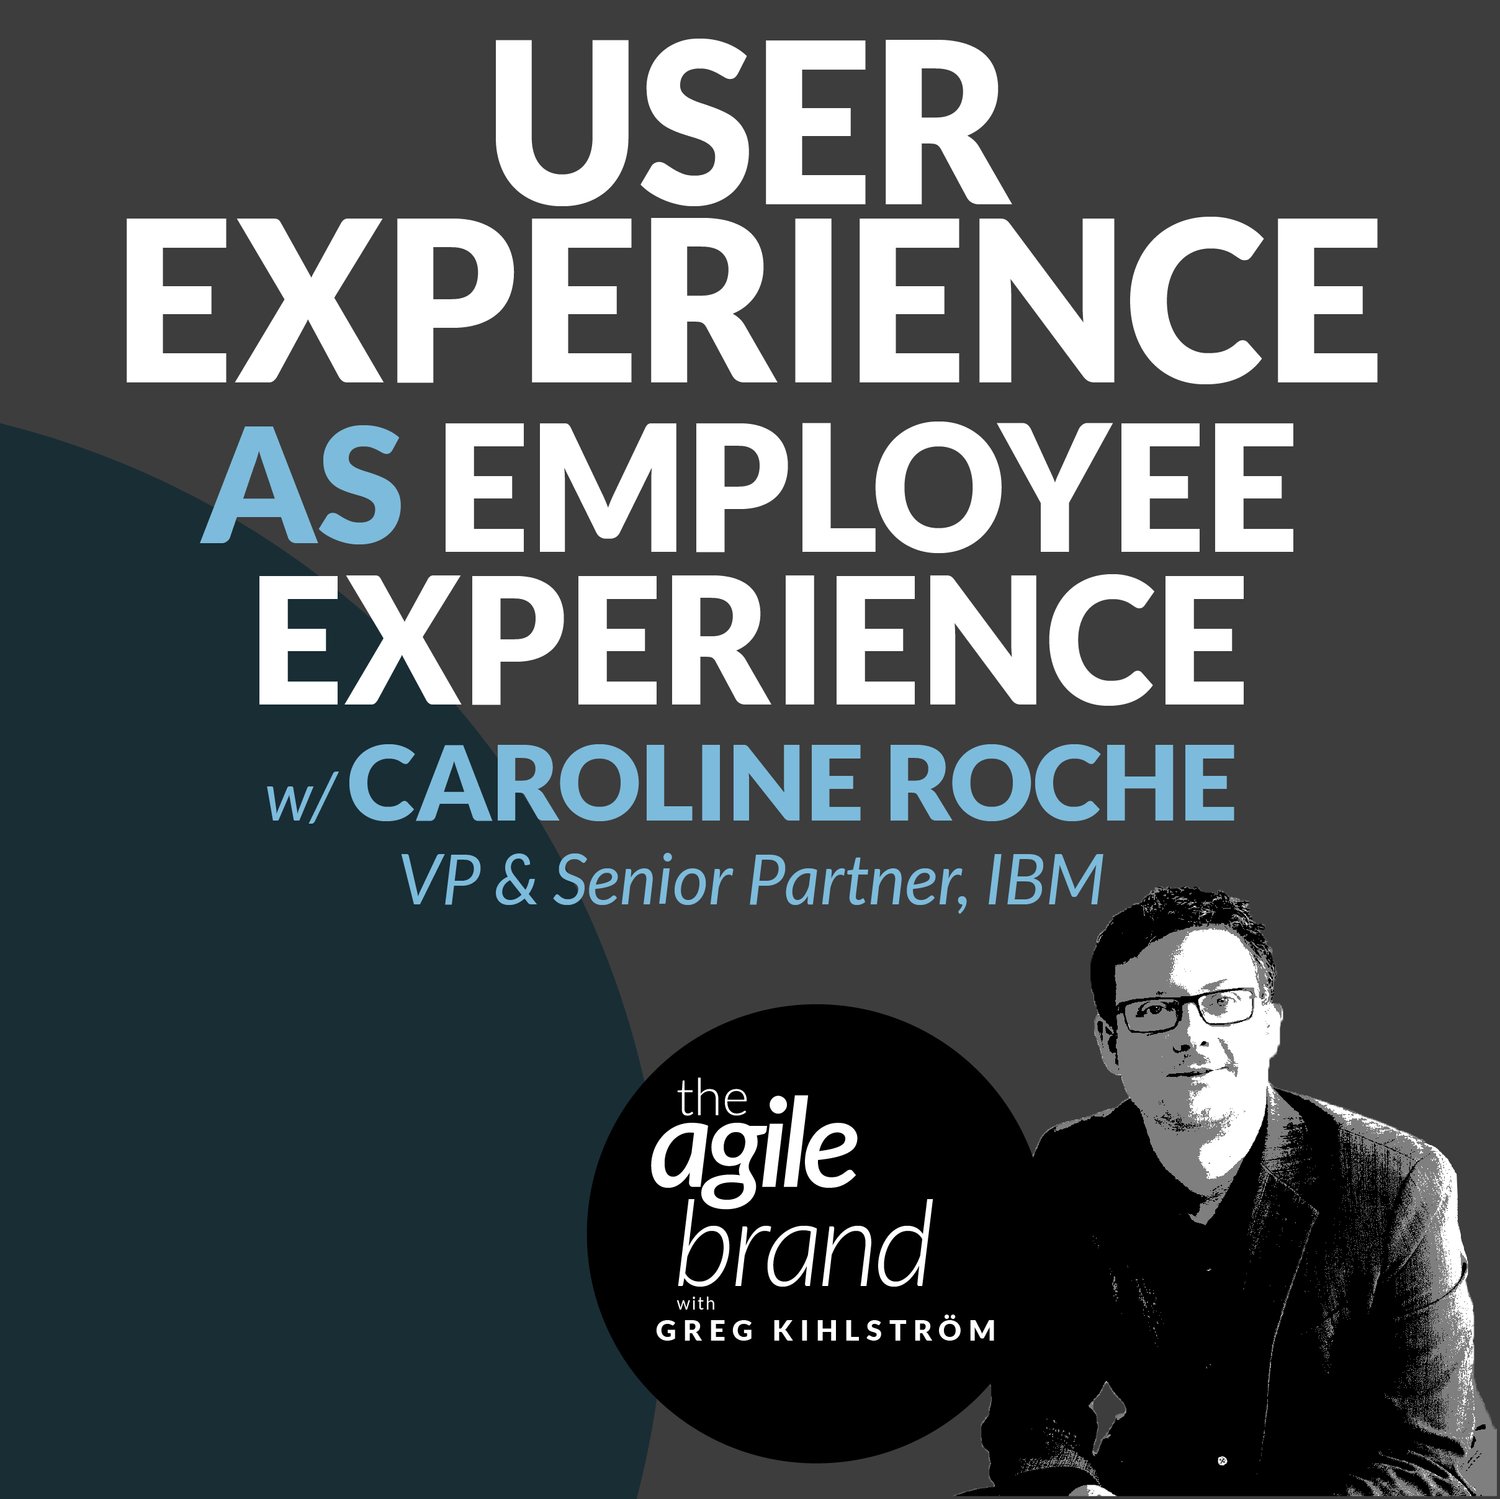 S5  342: User experience as employee experience with Caroline Roche, VP and Senior Partner, IBM